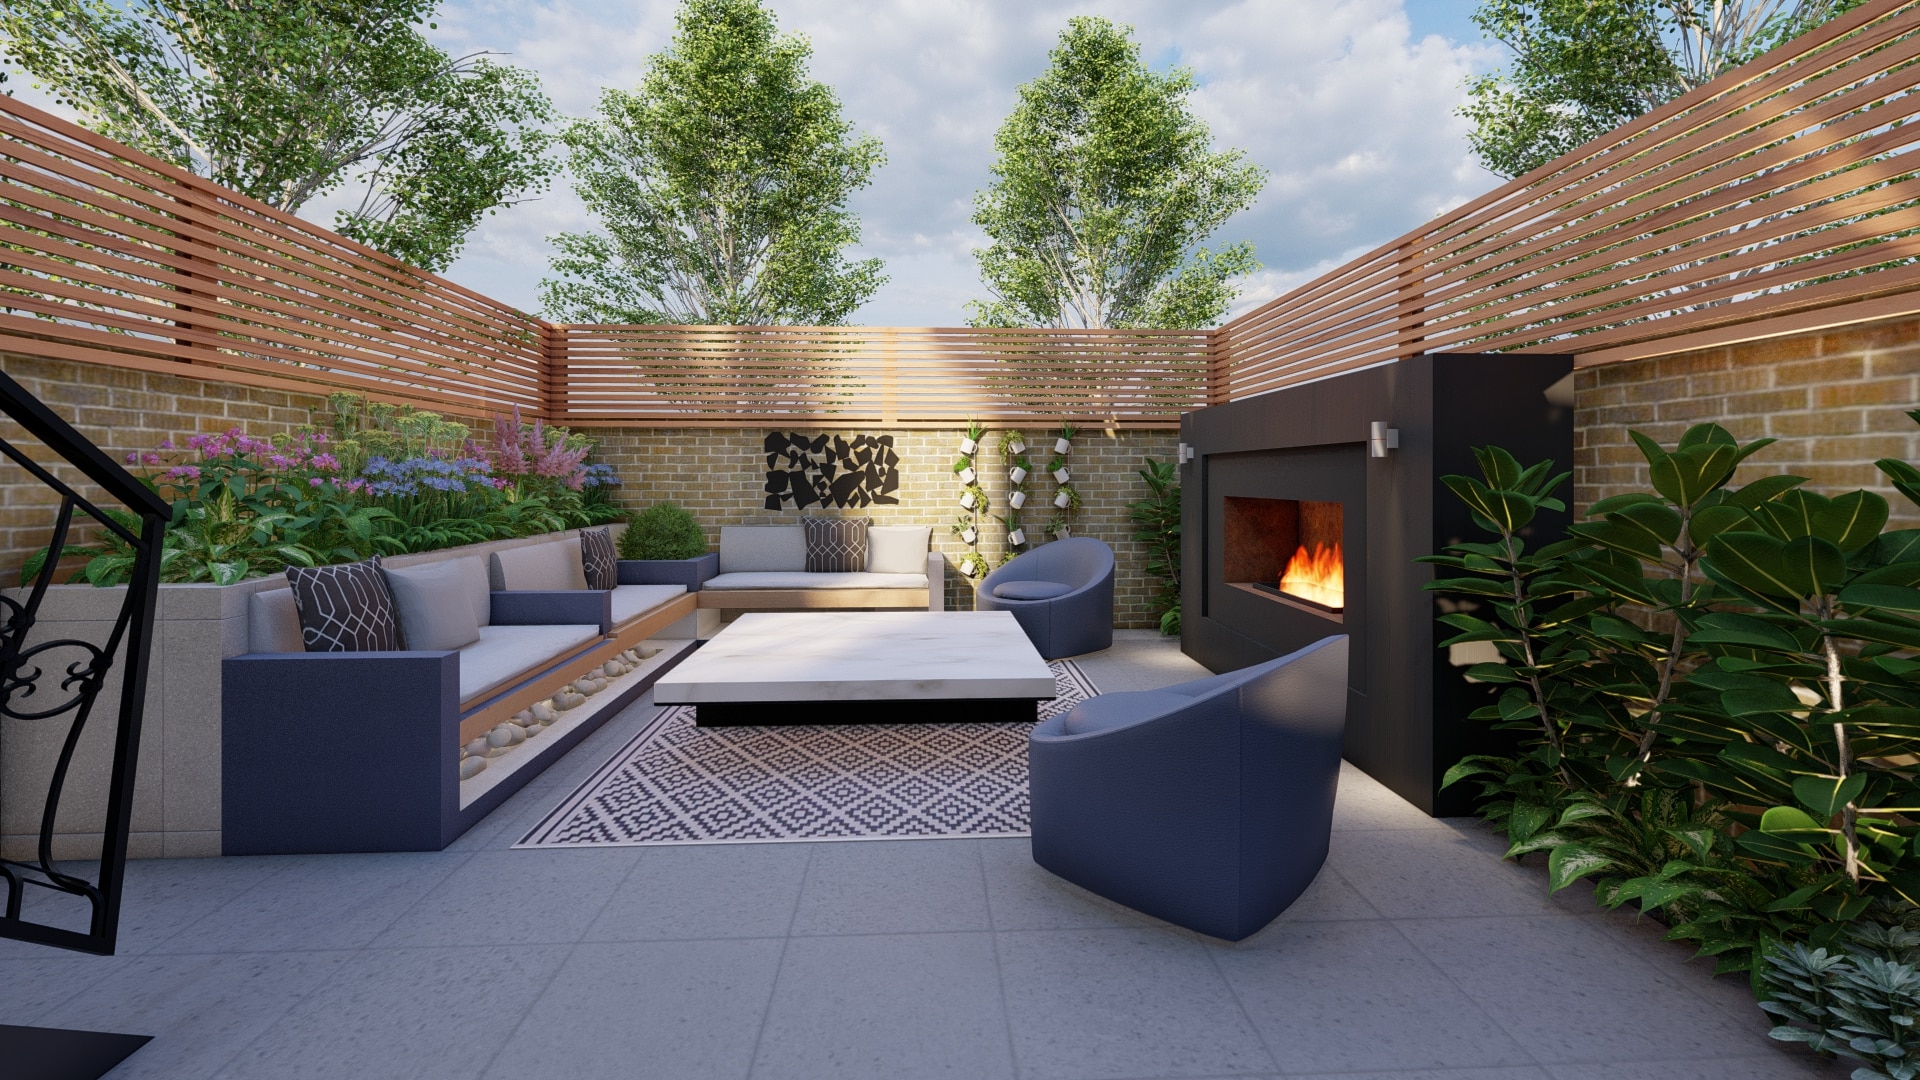 London courtyard garden design with fire place, bench and coffee table